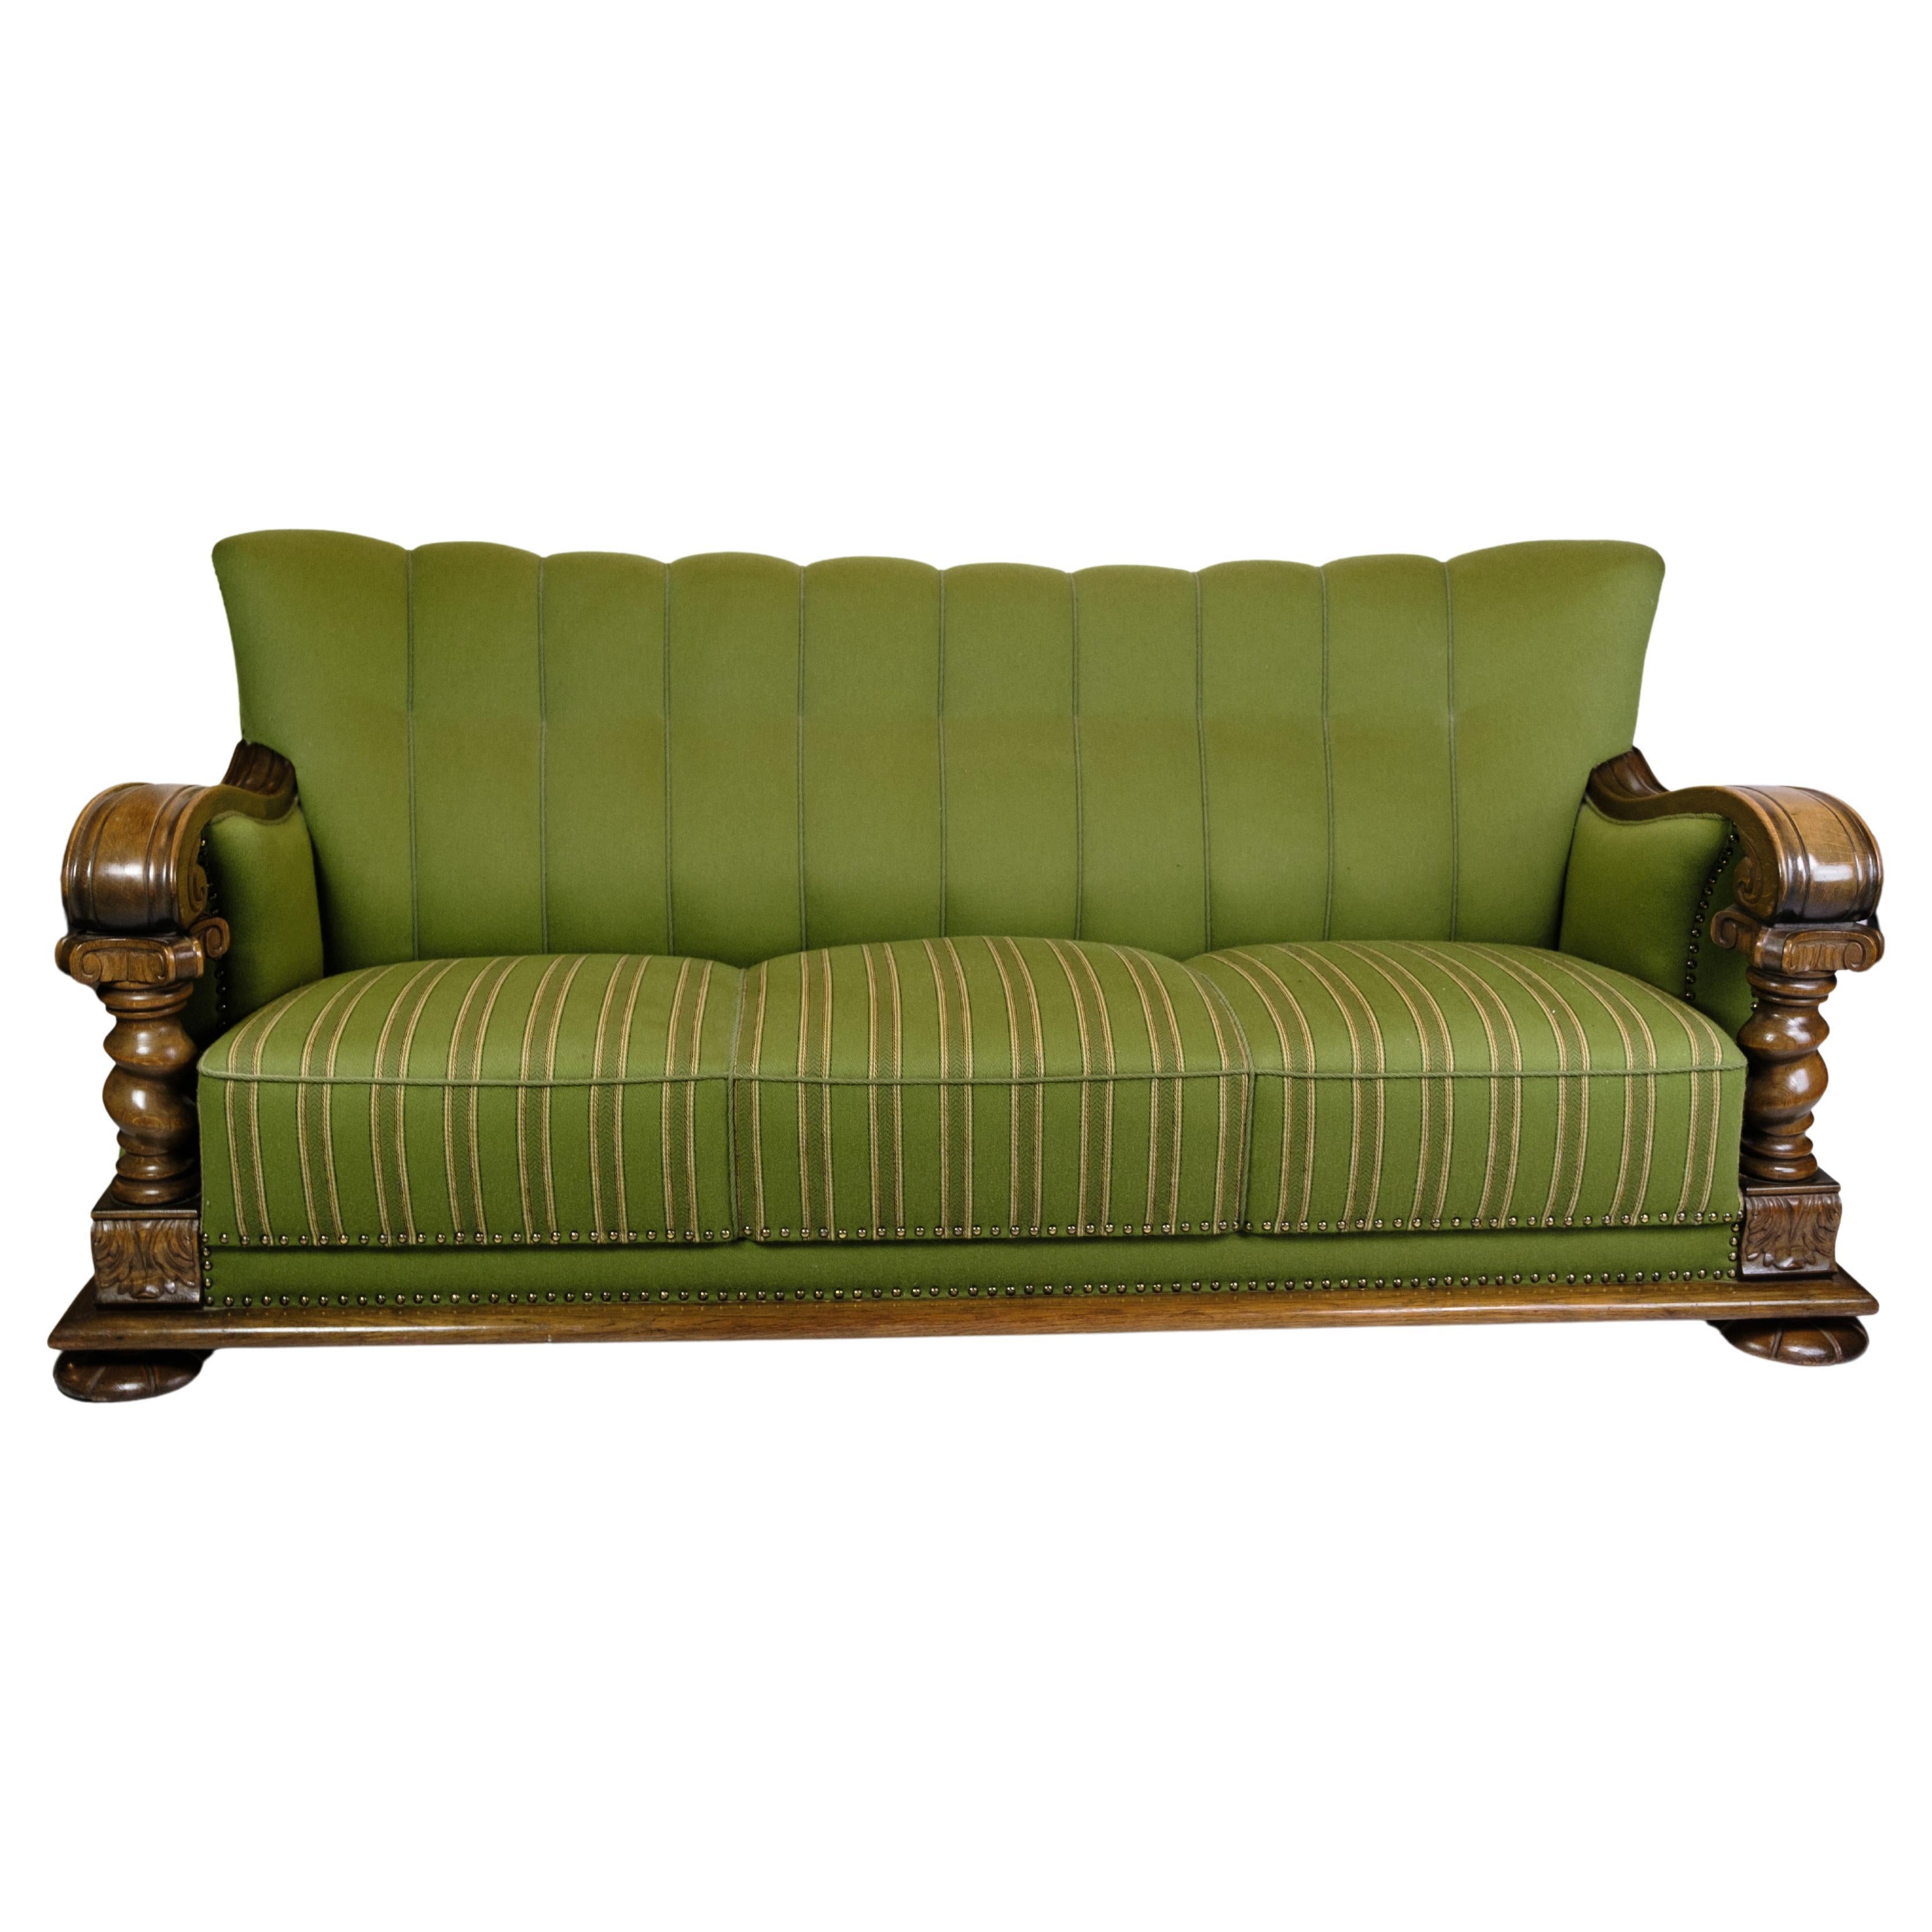 Sofa in Green fabric with Wood Carvings from 1920s.